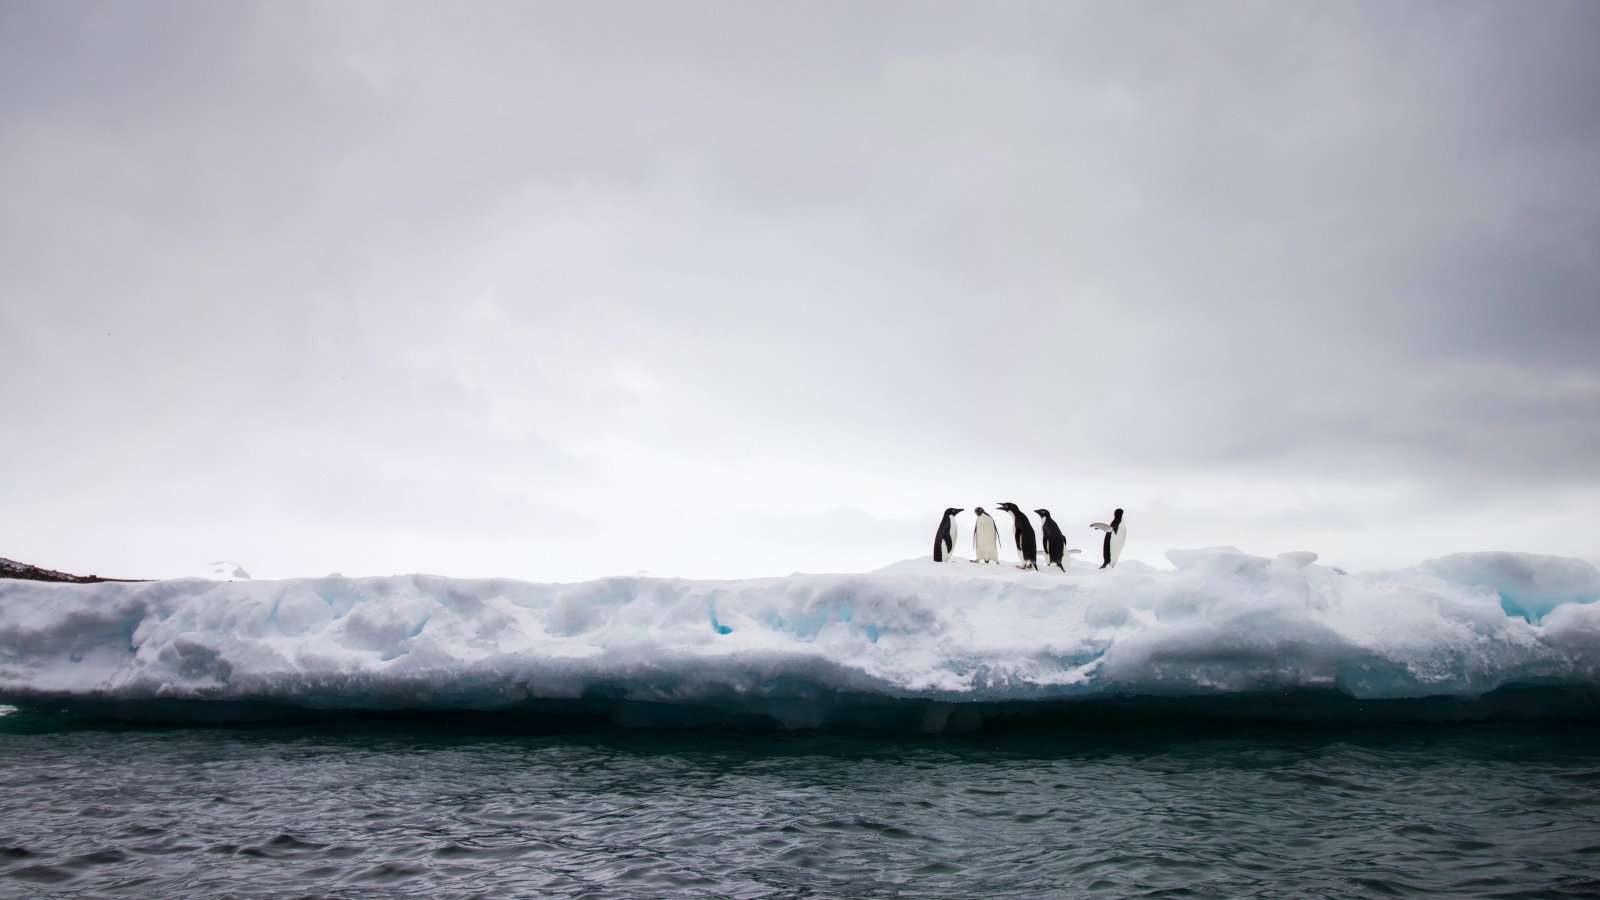 Five penguins sitting on ice with water in the foreground and a cloudy sky behind.